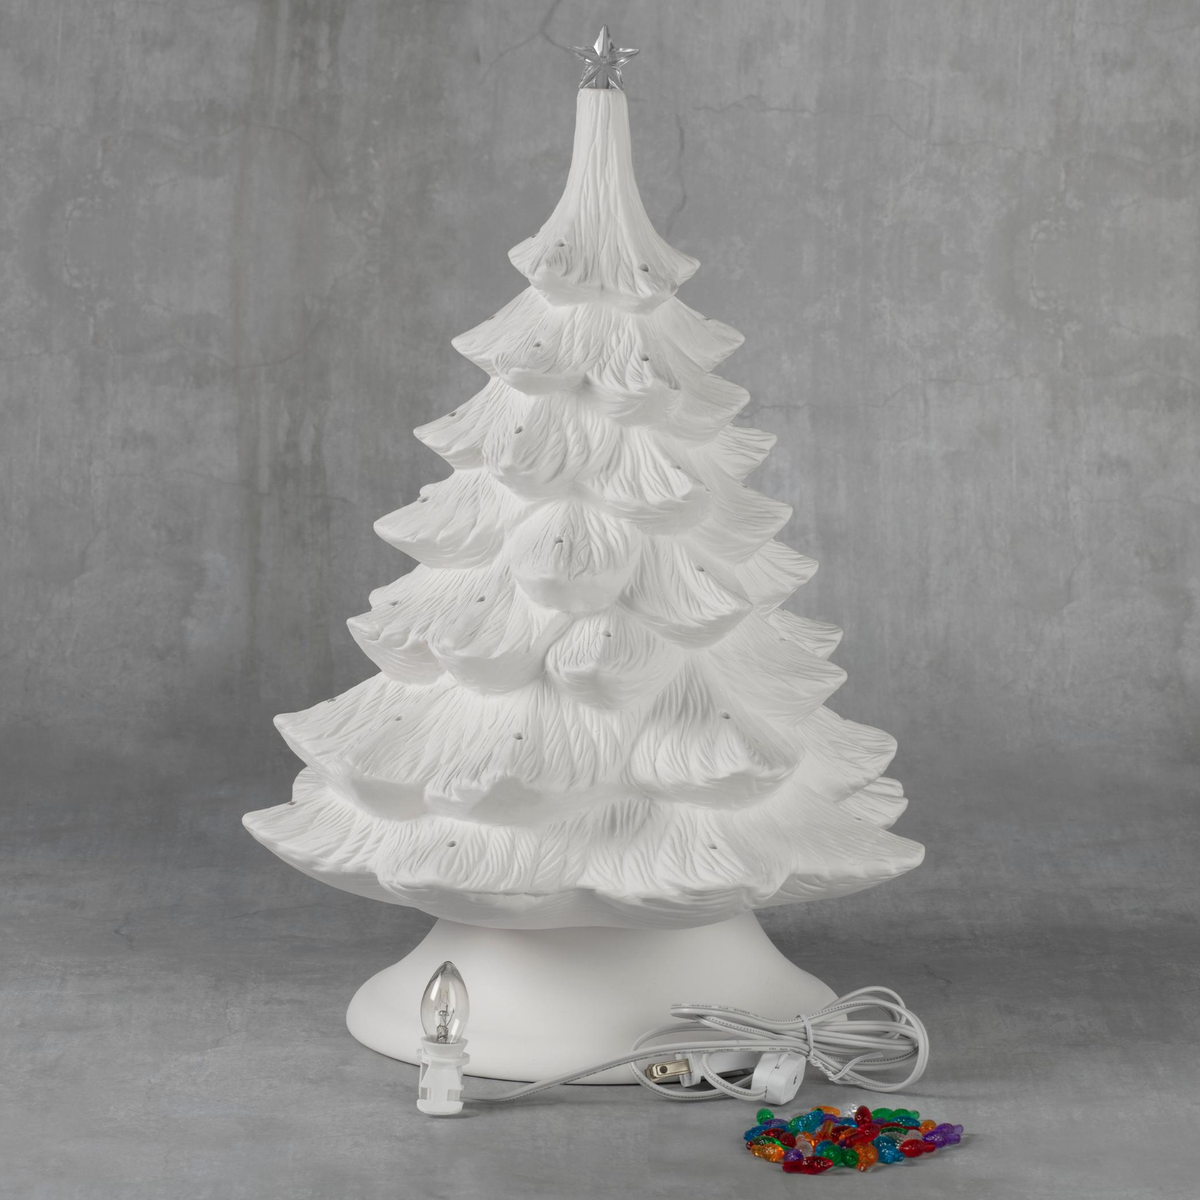 Duncan 45765 Bisque 17 inch Christmas Tree with Base, Case of 1